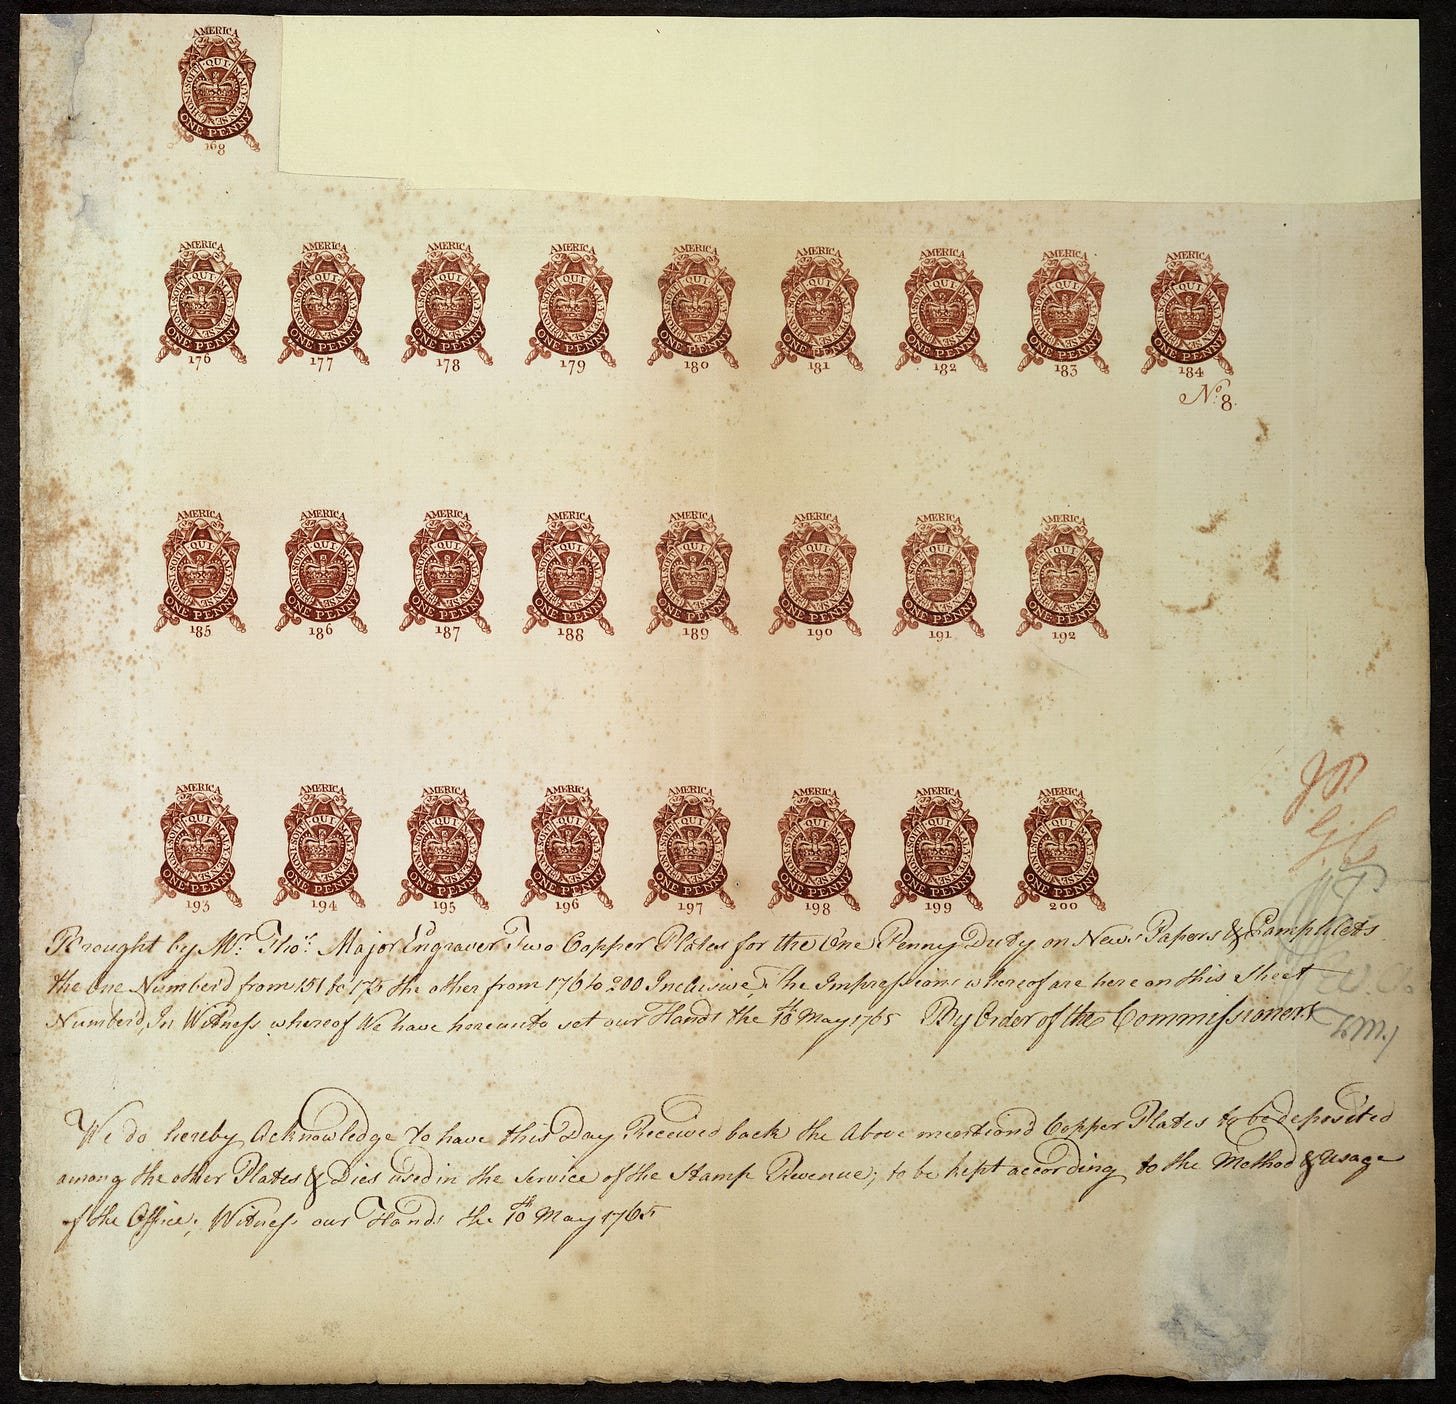 https://upload.wikimedia.org/wikipedia/commons/a/a6/Proof_sheet_of_one_penny_stamps_Stamp_Act_1765.jpg